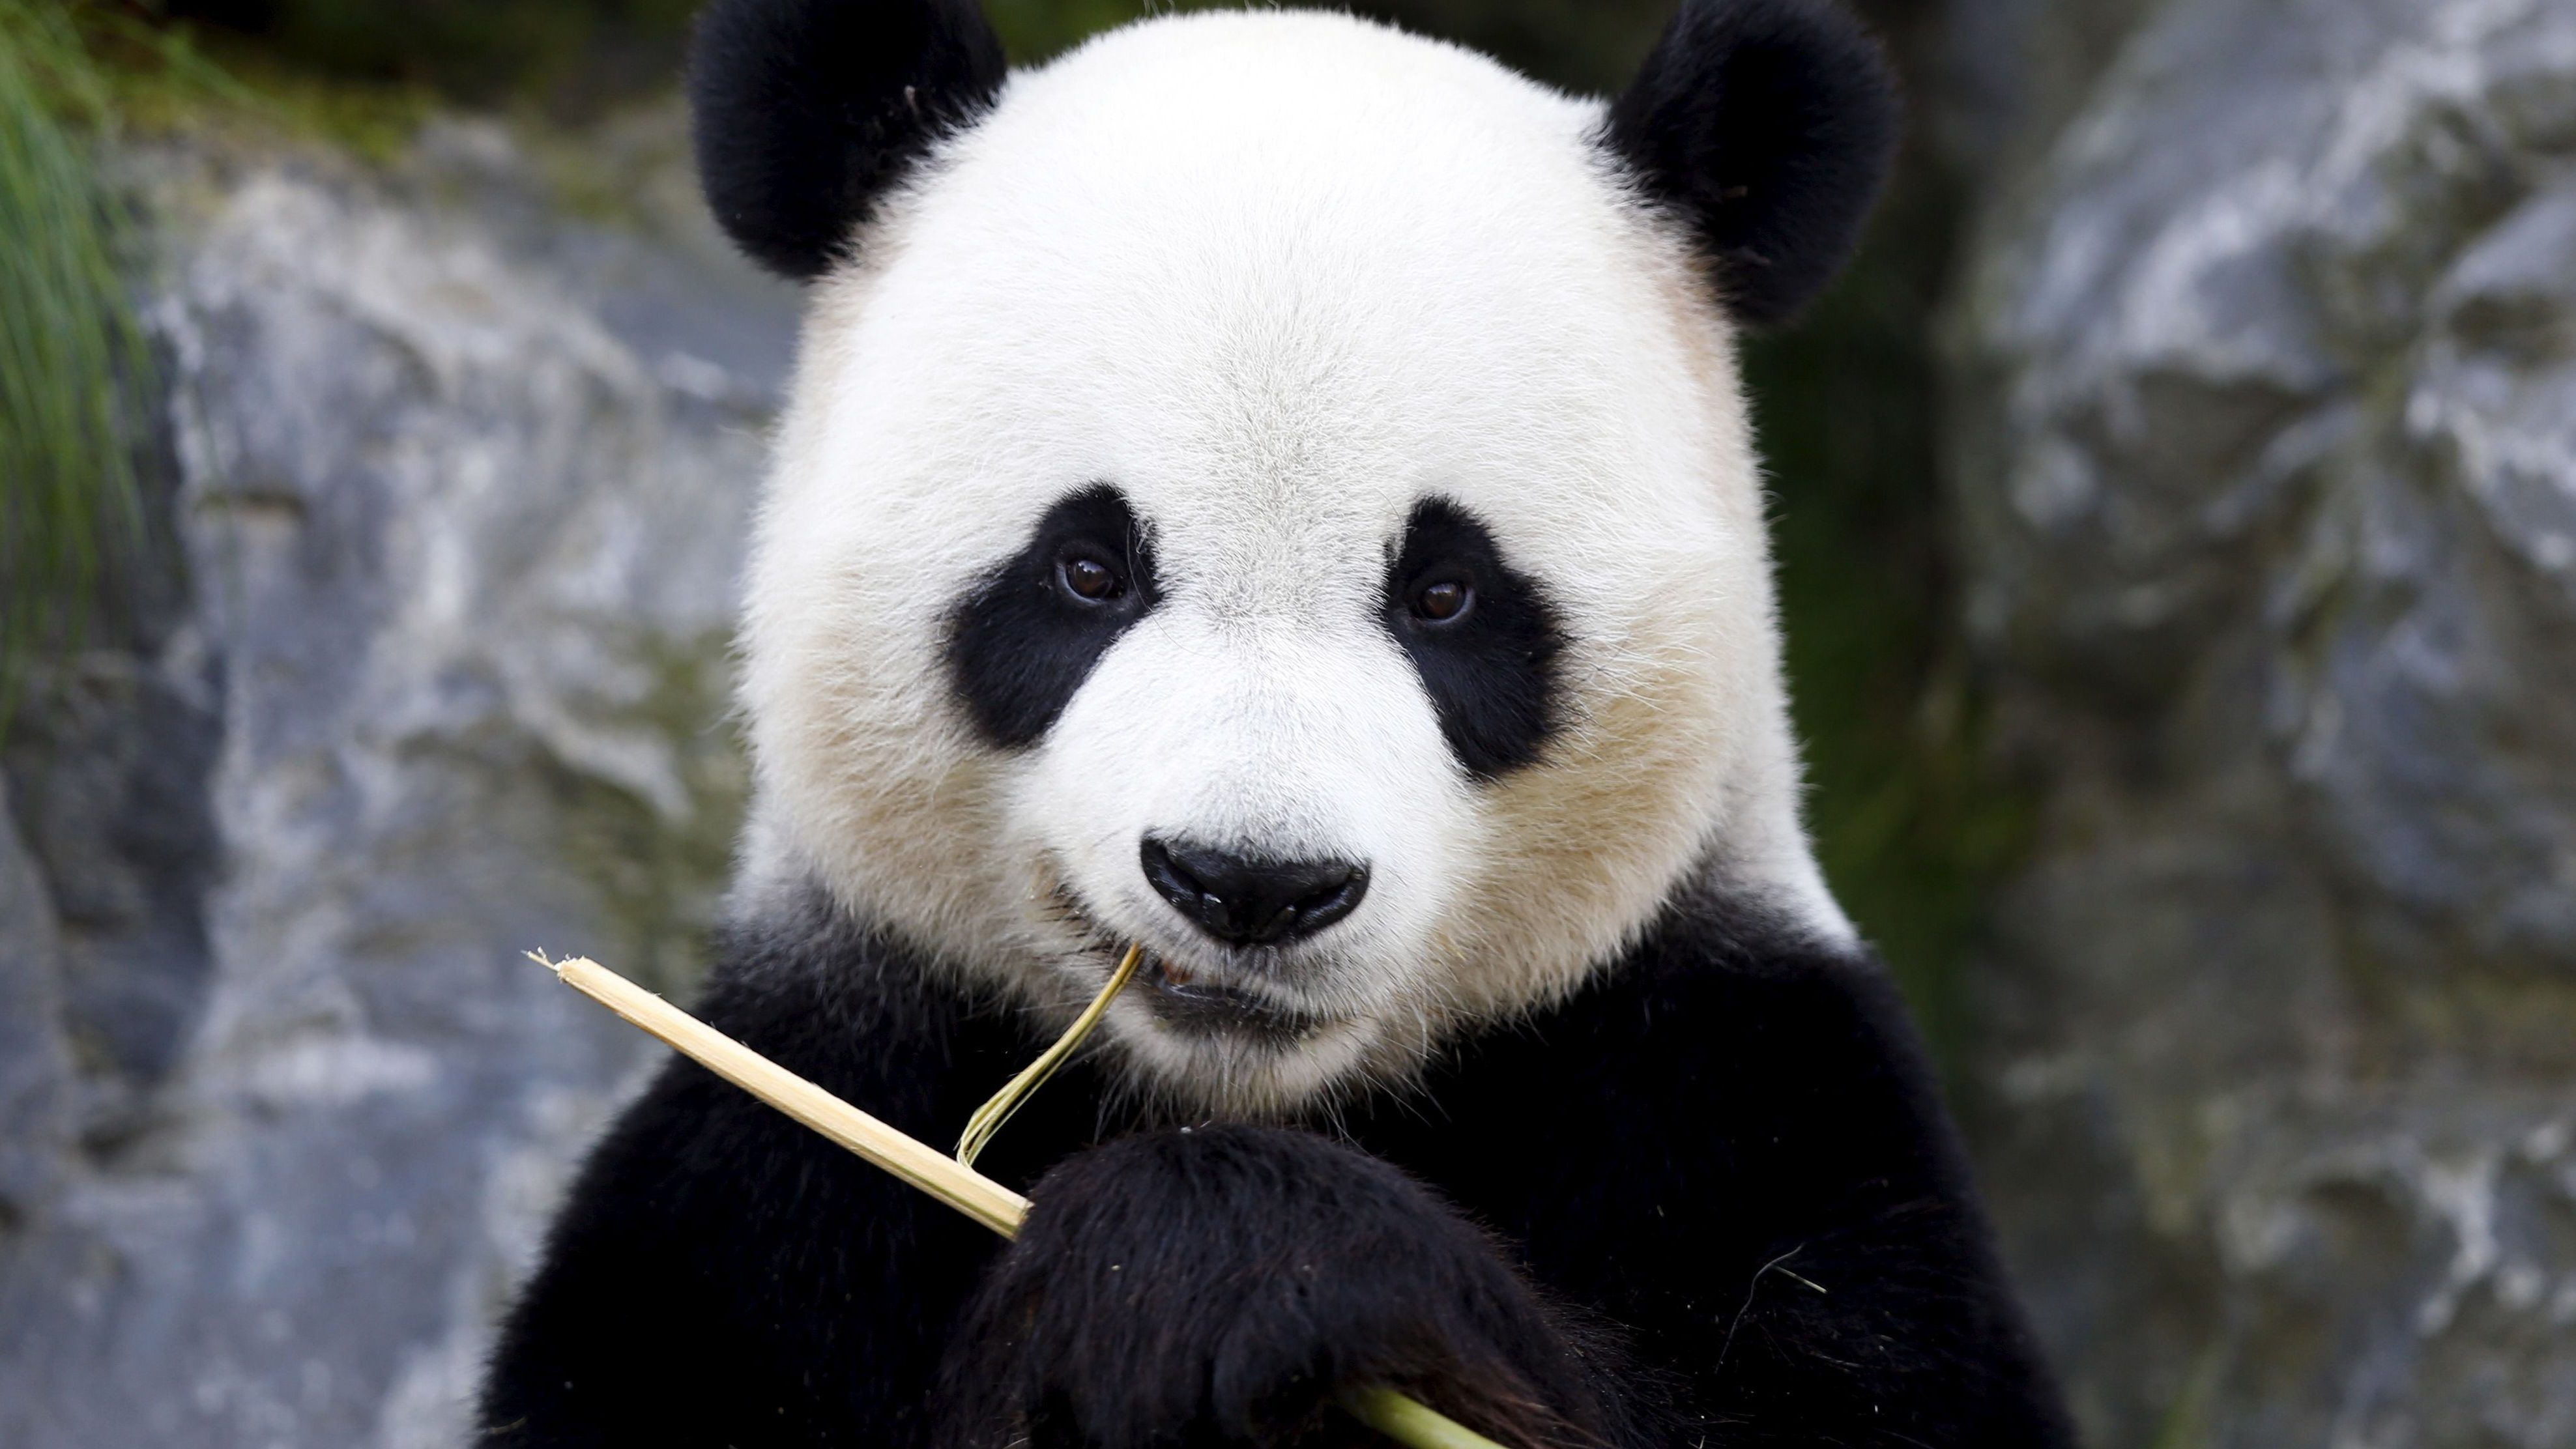 Scientists puzzled by pandas' black eye patches turning white — Quartz